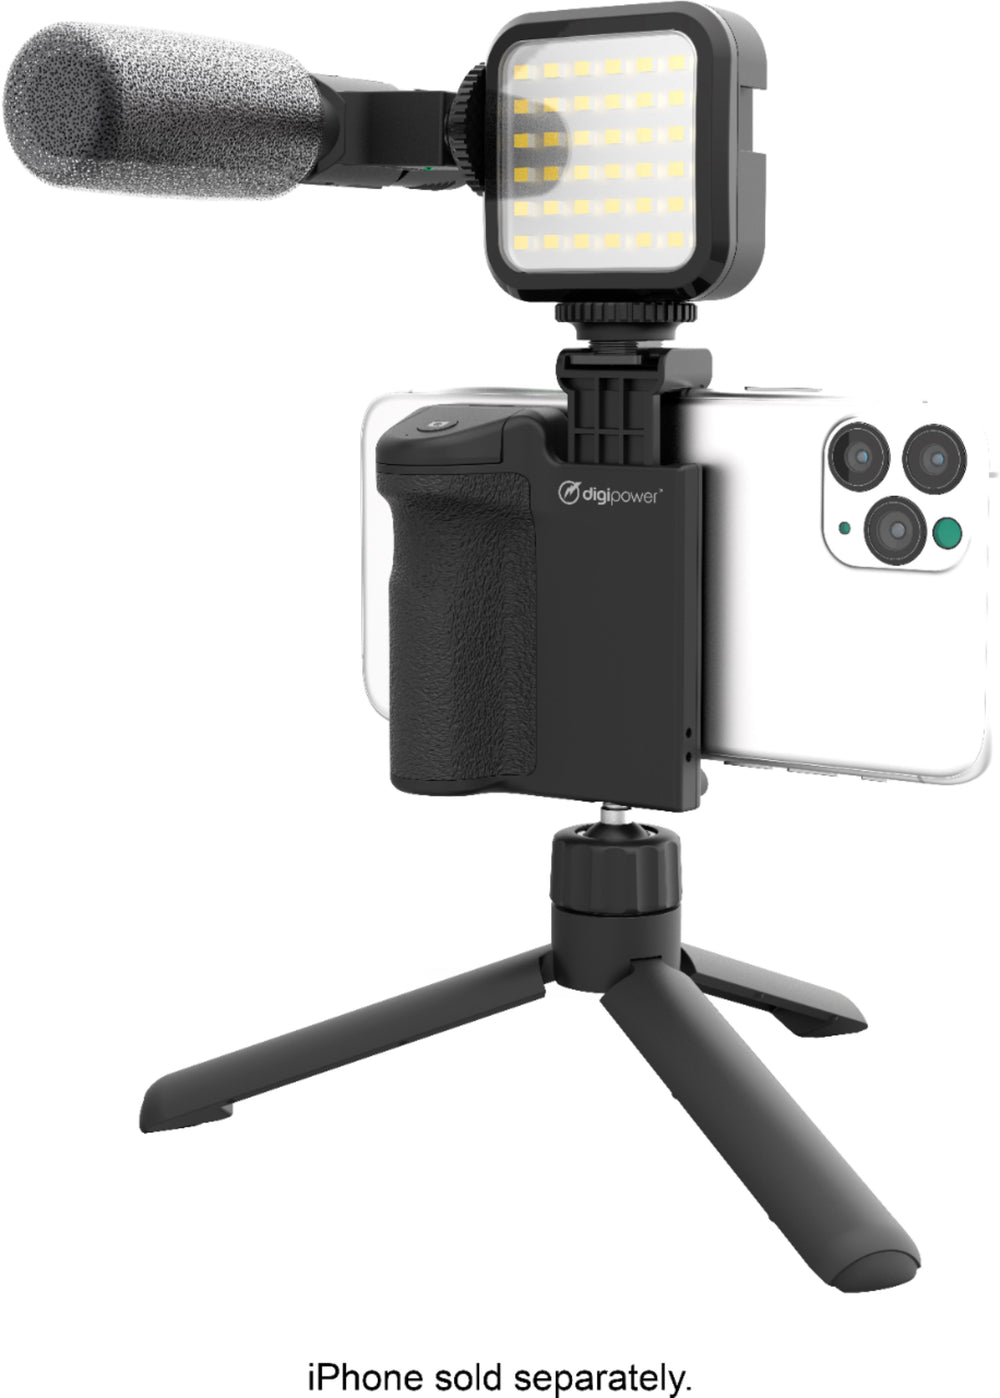 Digipower - Follow ME Vlogging Kit for Phones and Cameras – Includes Microphone, LED light, Bluetooth remote, phone grip and tripod_1